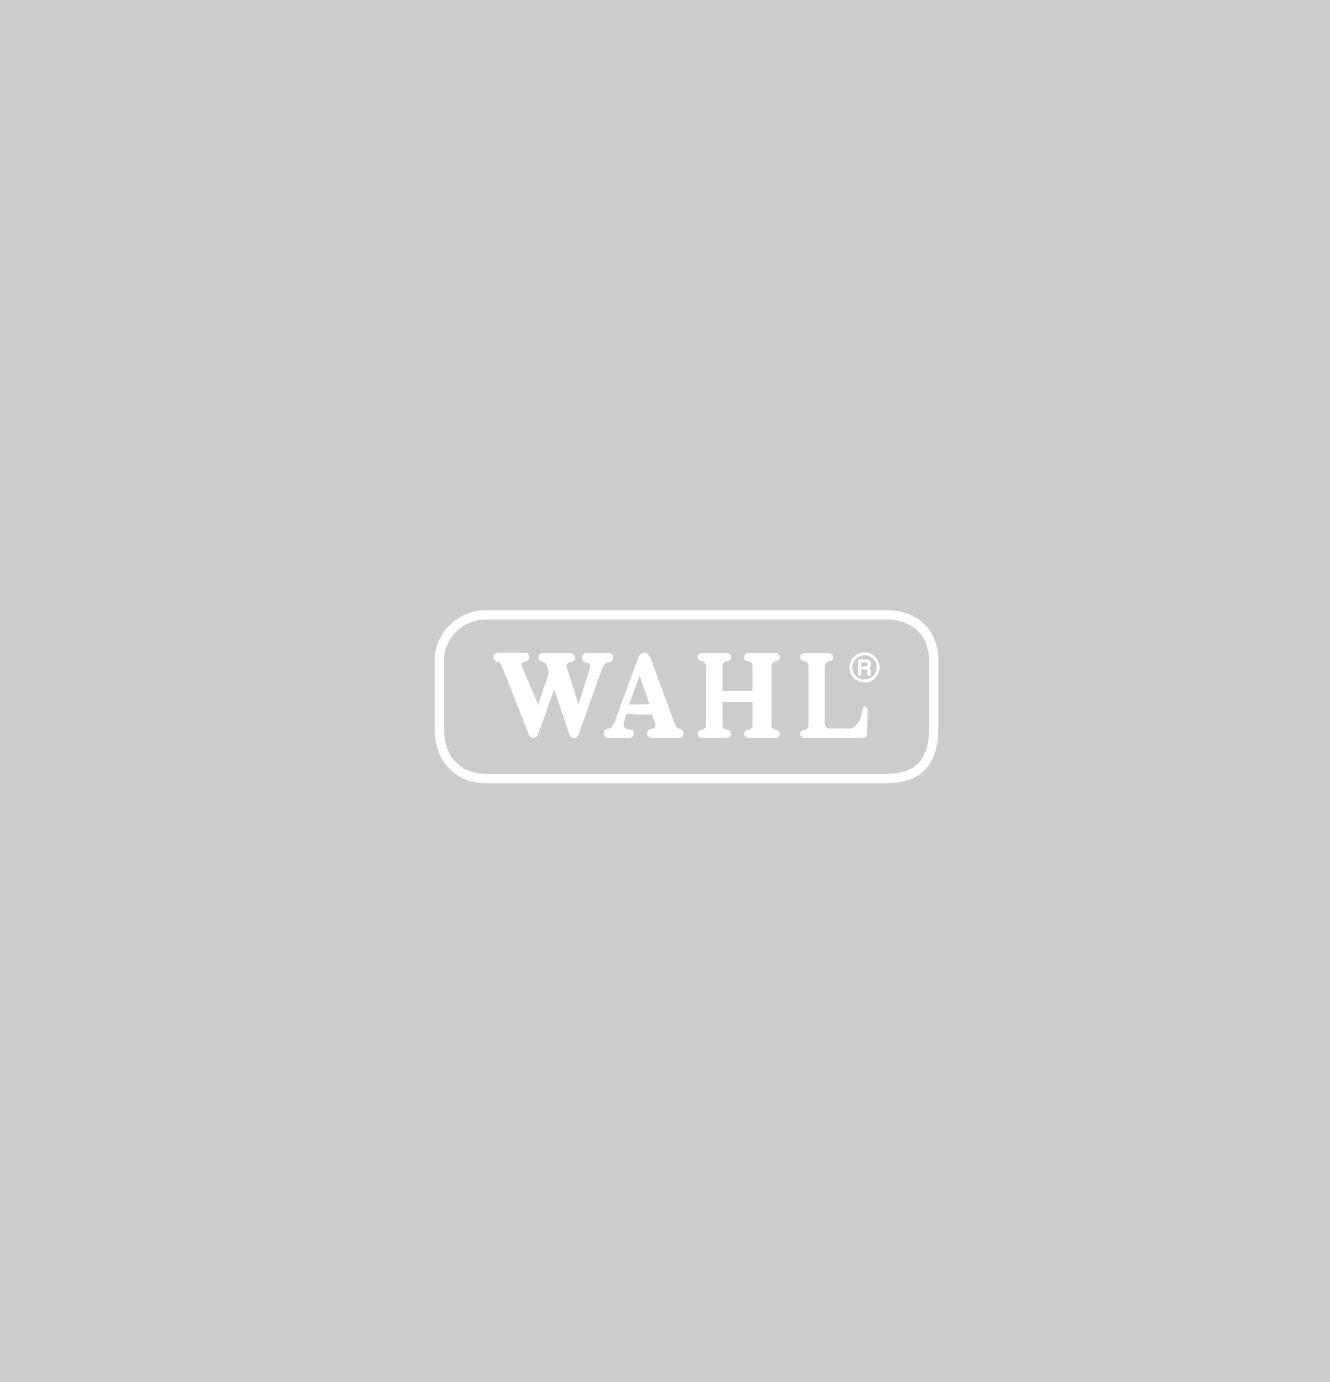 Contest Proves Life is Better with a Beard: Wahl Launches Second Annual Search for the ‘Most Talented Beard in America’, Ready to Change Lives Again